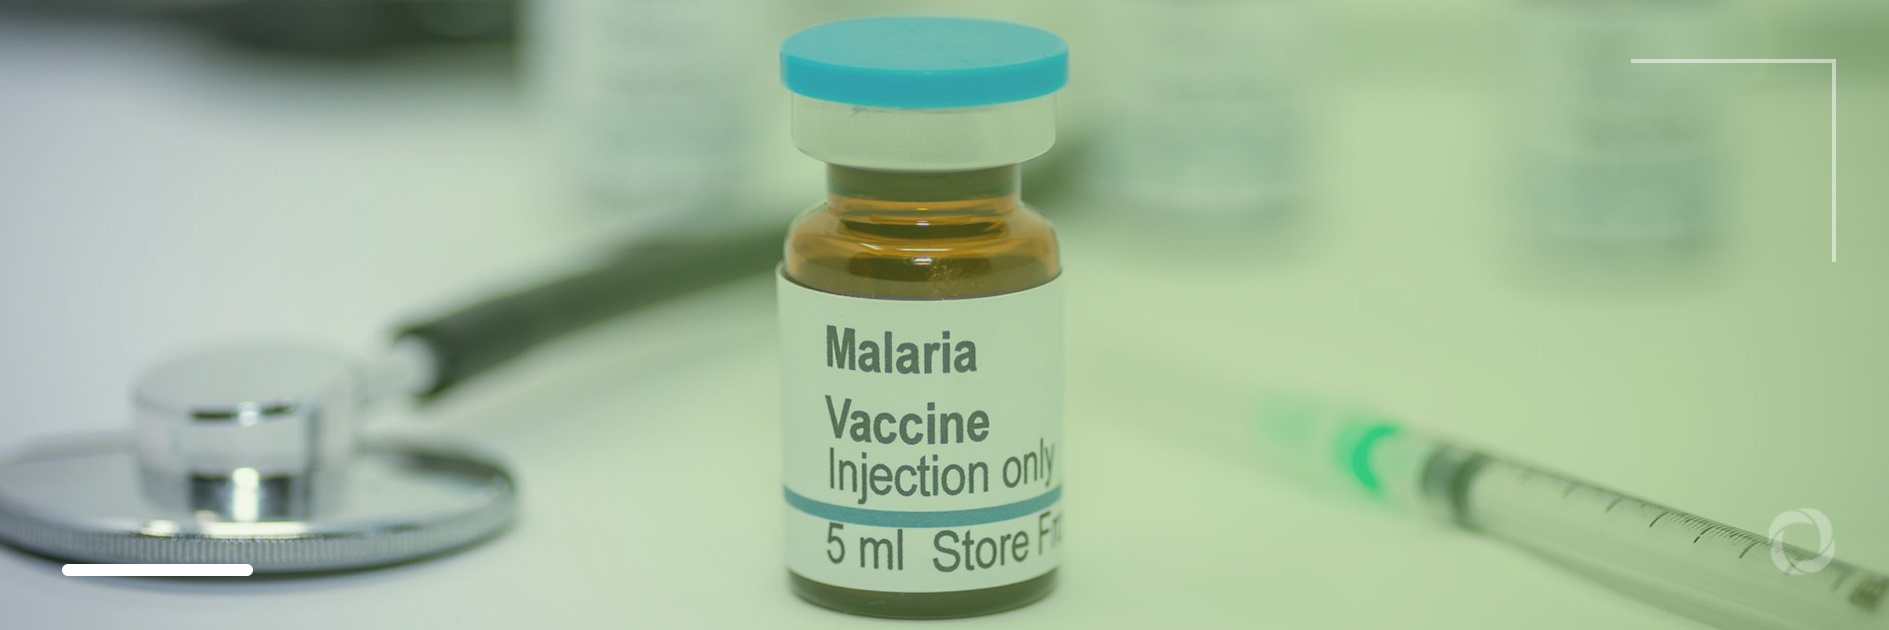 New malaria vaccine seen as bringing potential relief to developing countries